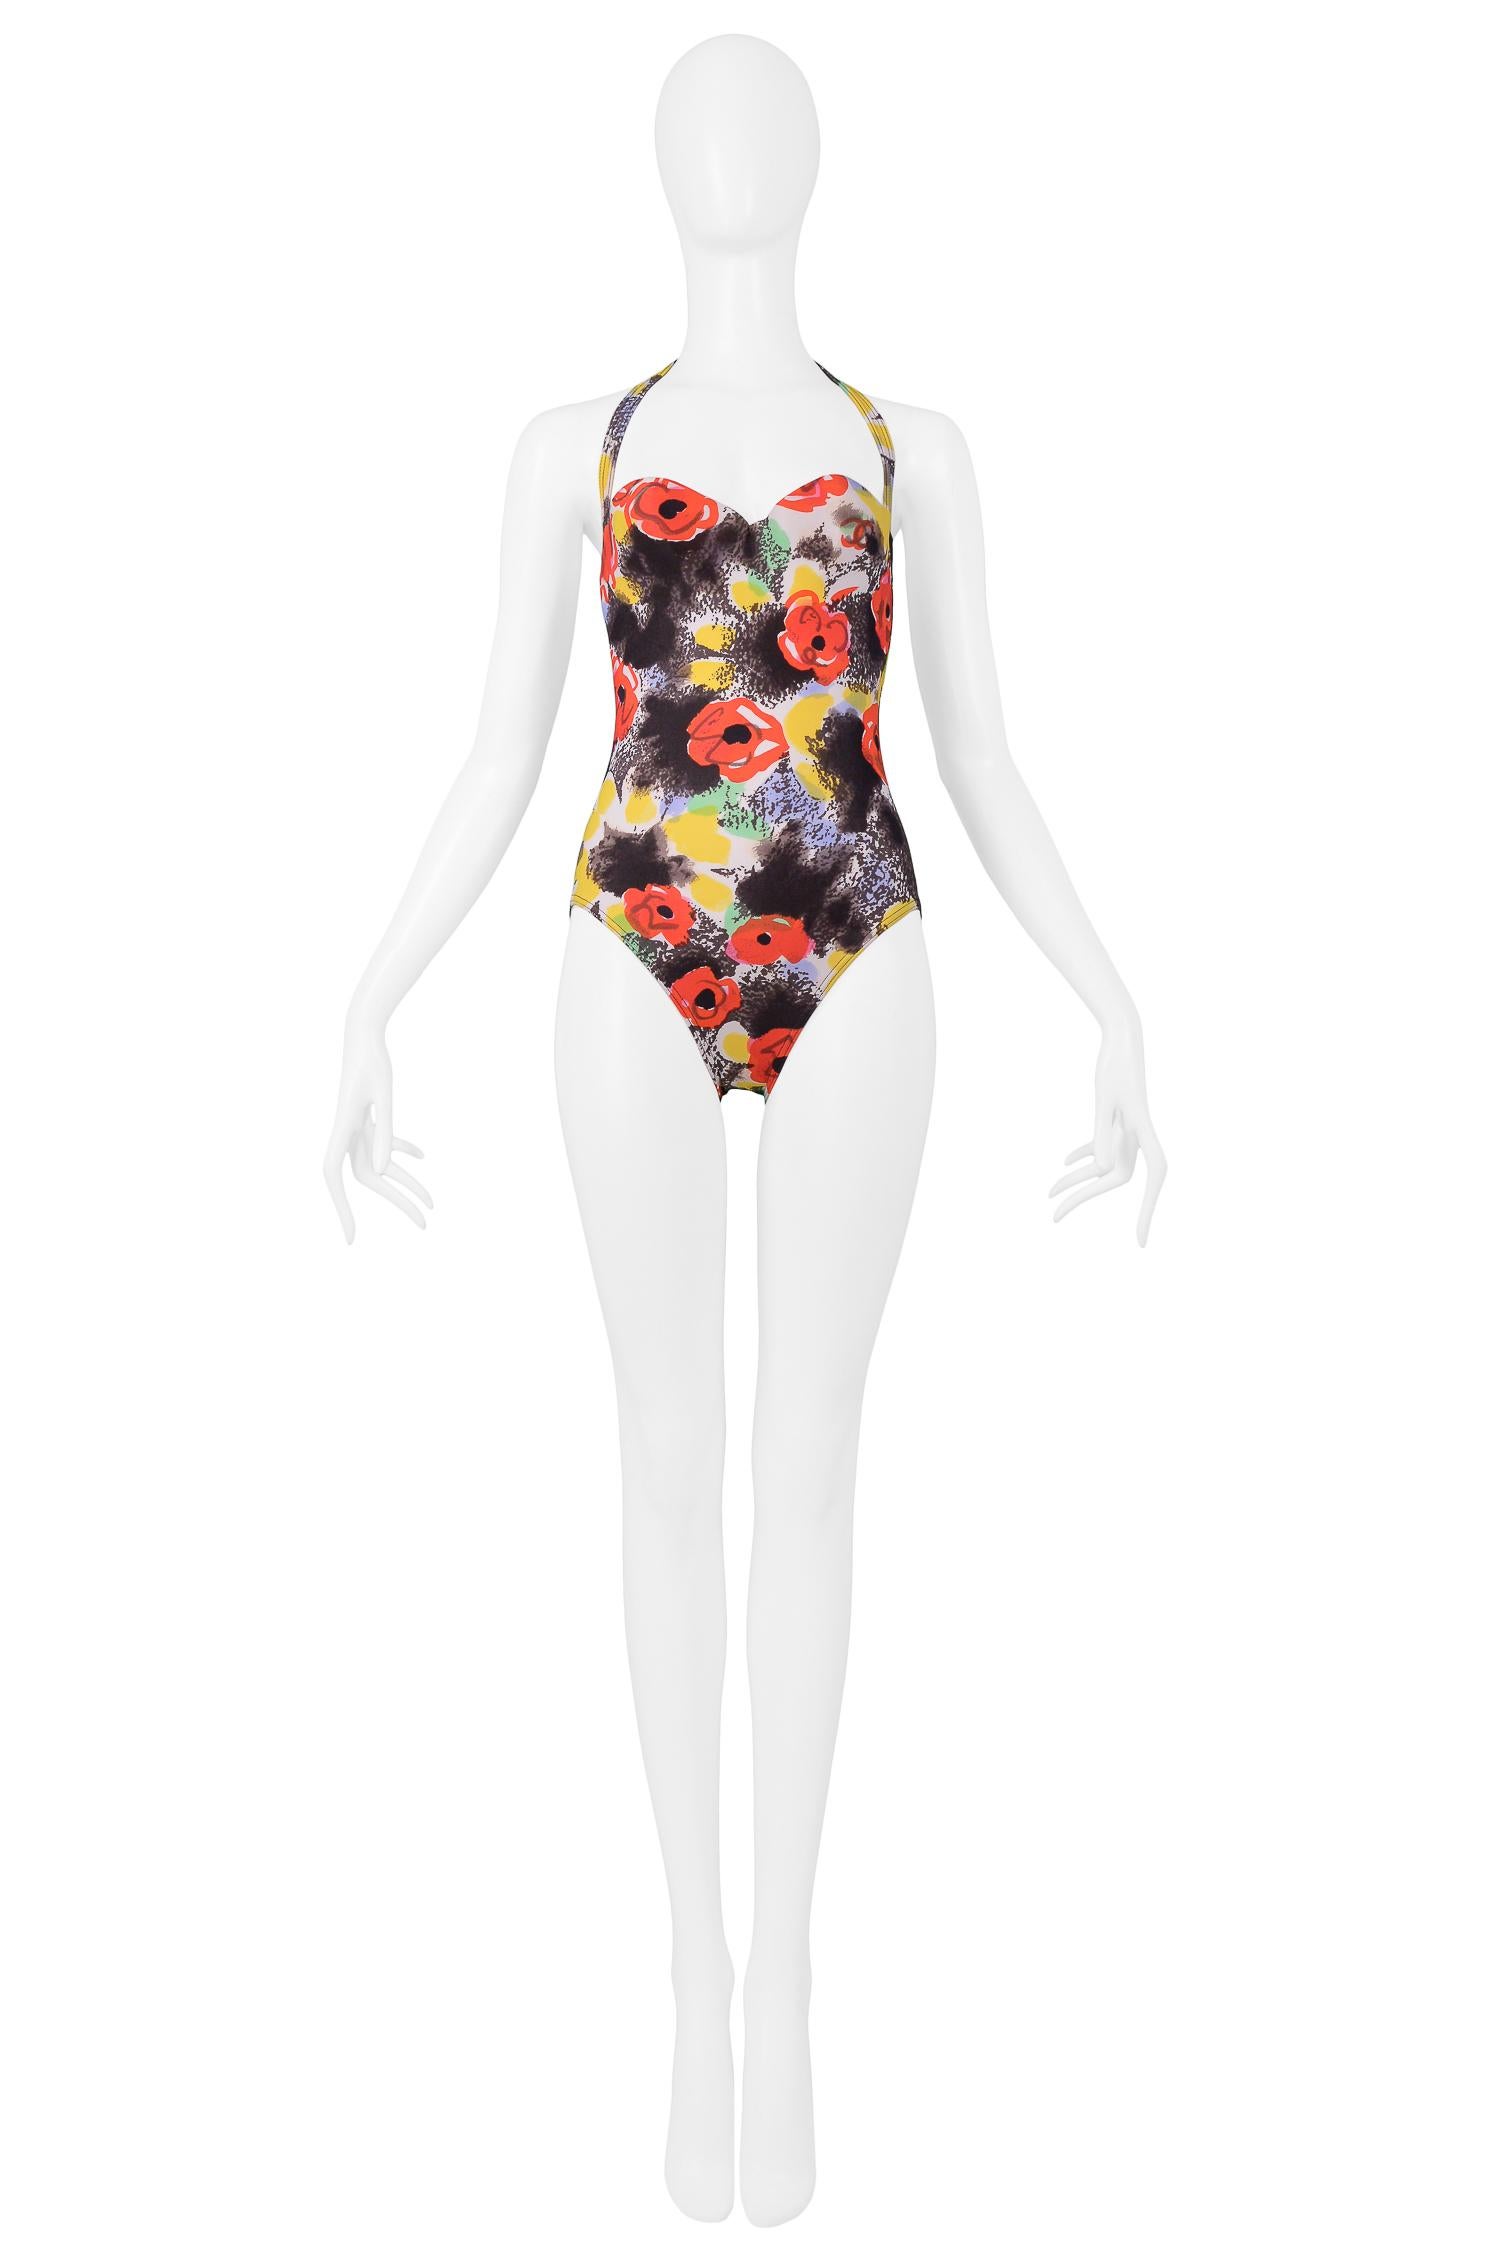 Vintage Chanel black, red, and yellow floral printed one piece swimsuit featuring tie back halter and sweetheart neckline.

Excellent Vintage Condition.

Size 38